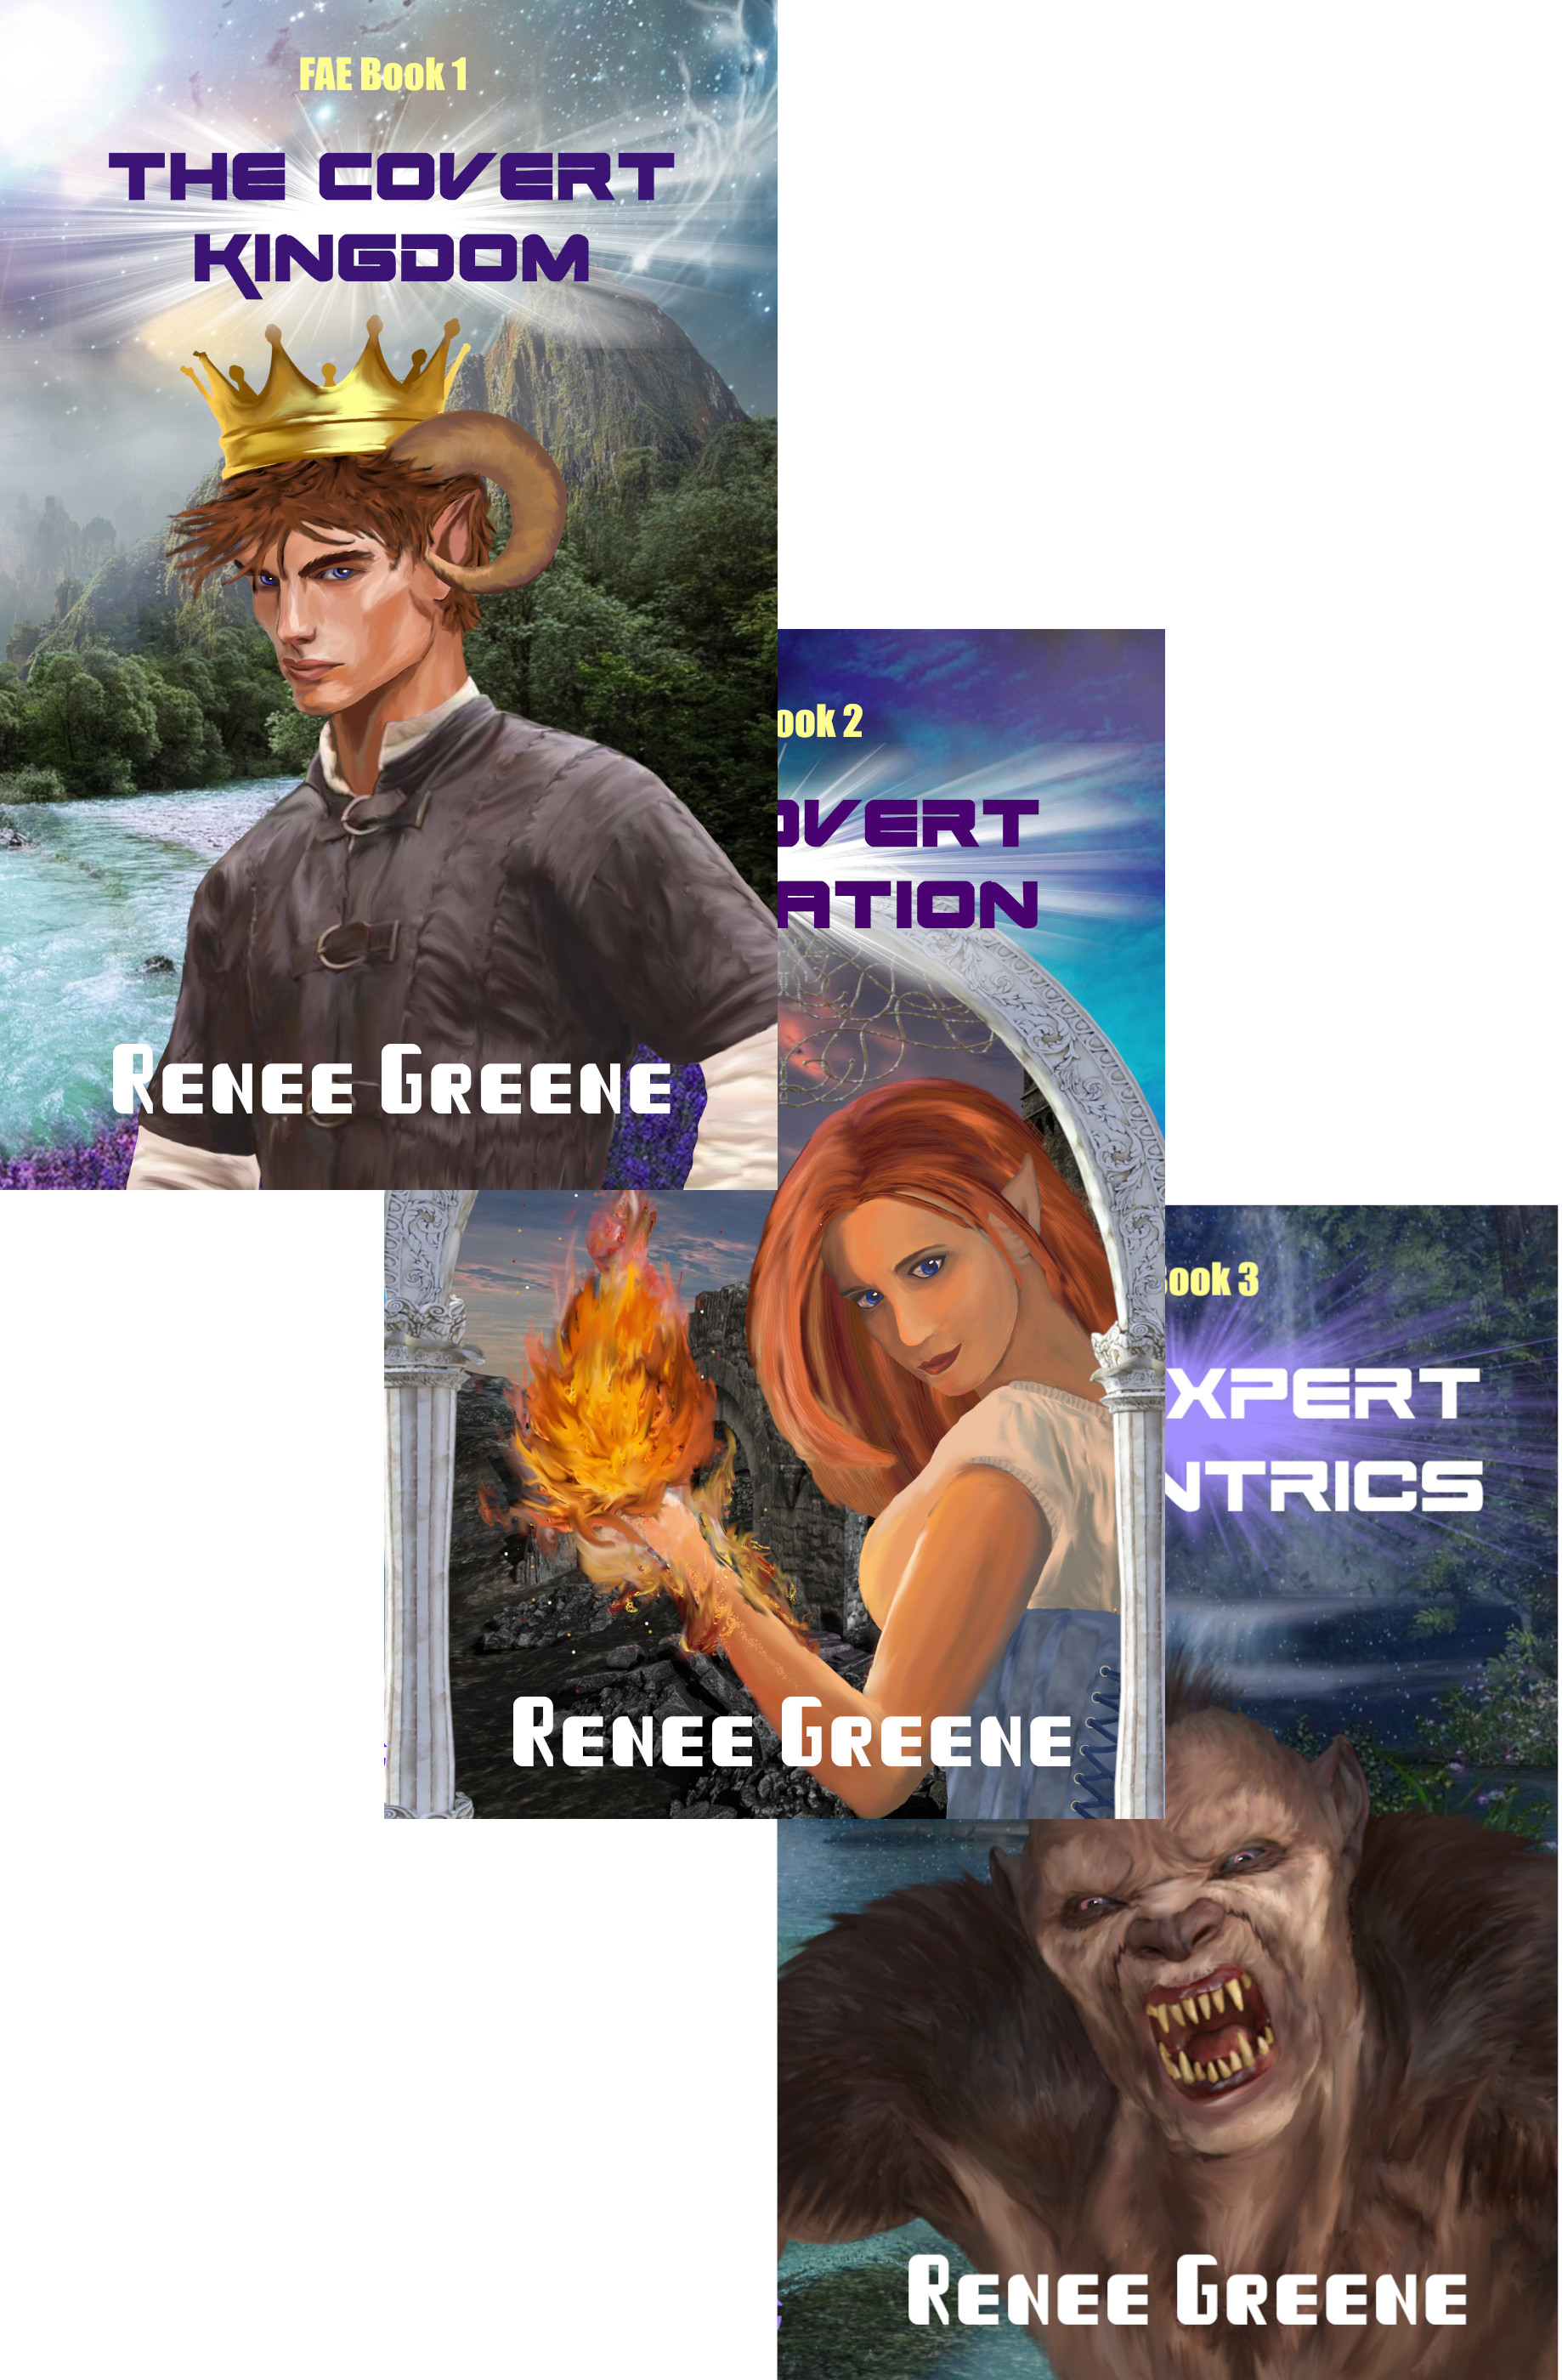 The Department of FAE series